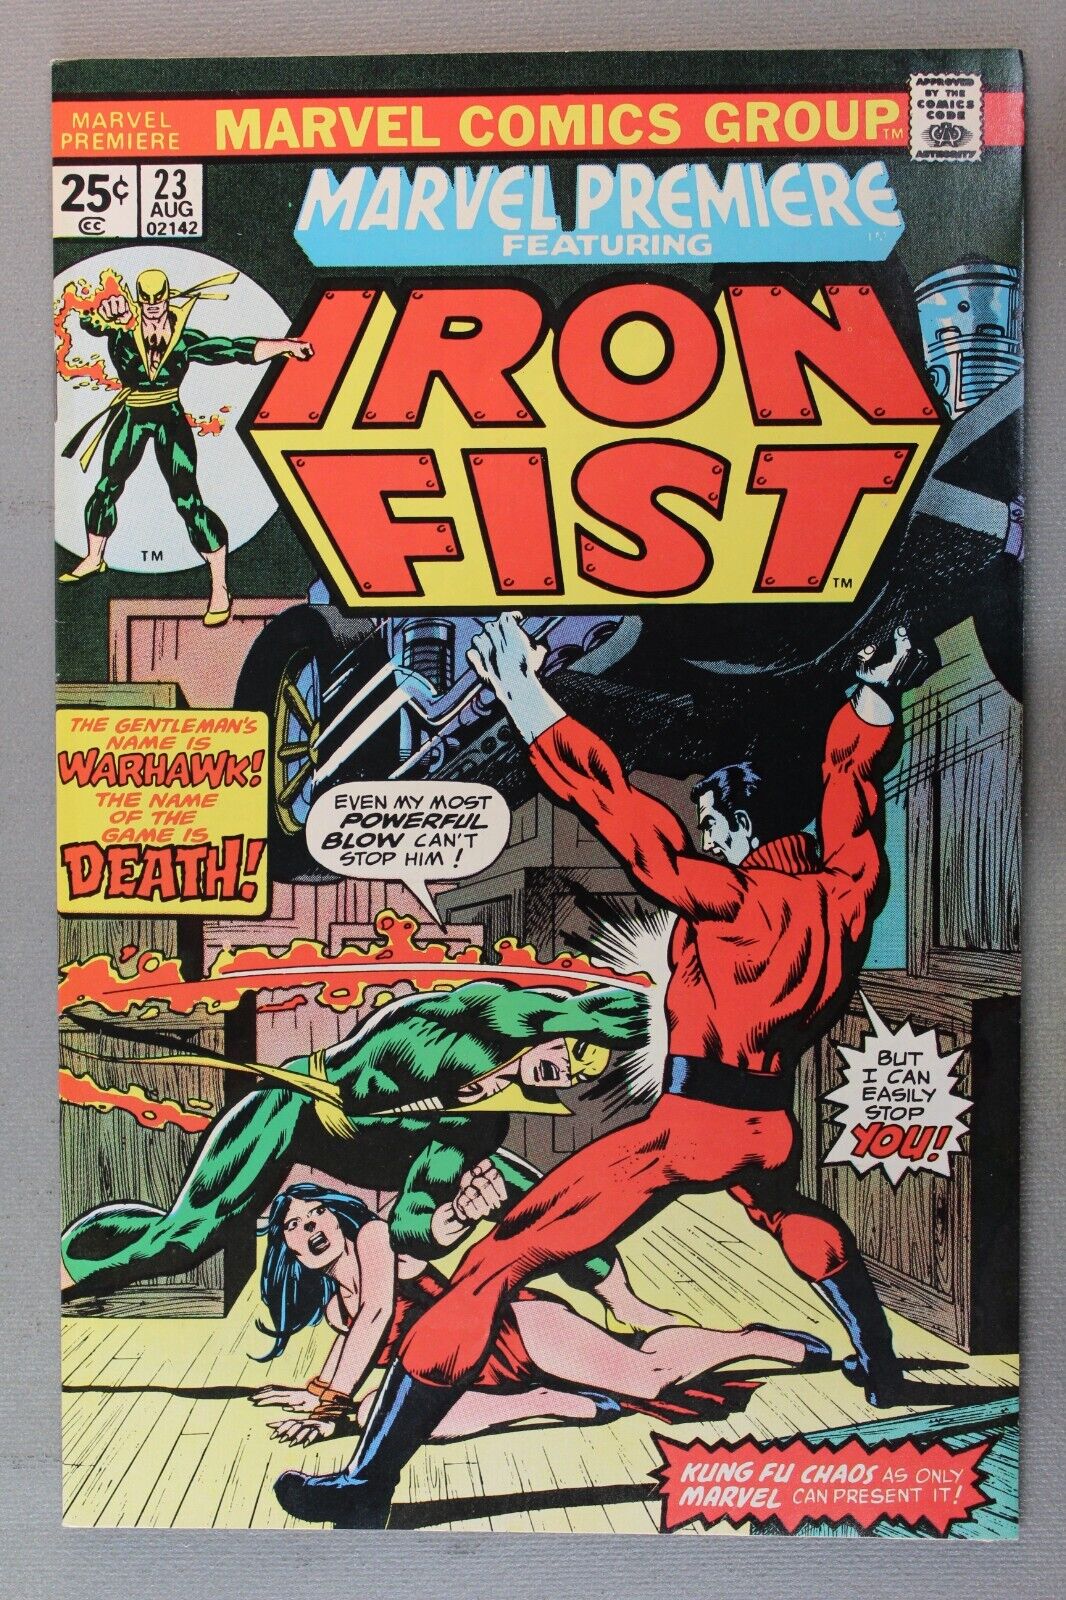 MARVEL PREMIERE #23 Featuring IRON FIST...HIGH GRADE NEVER READ